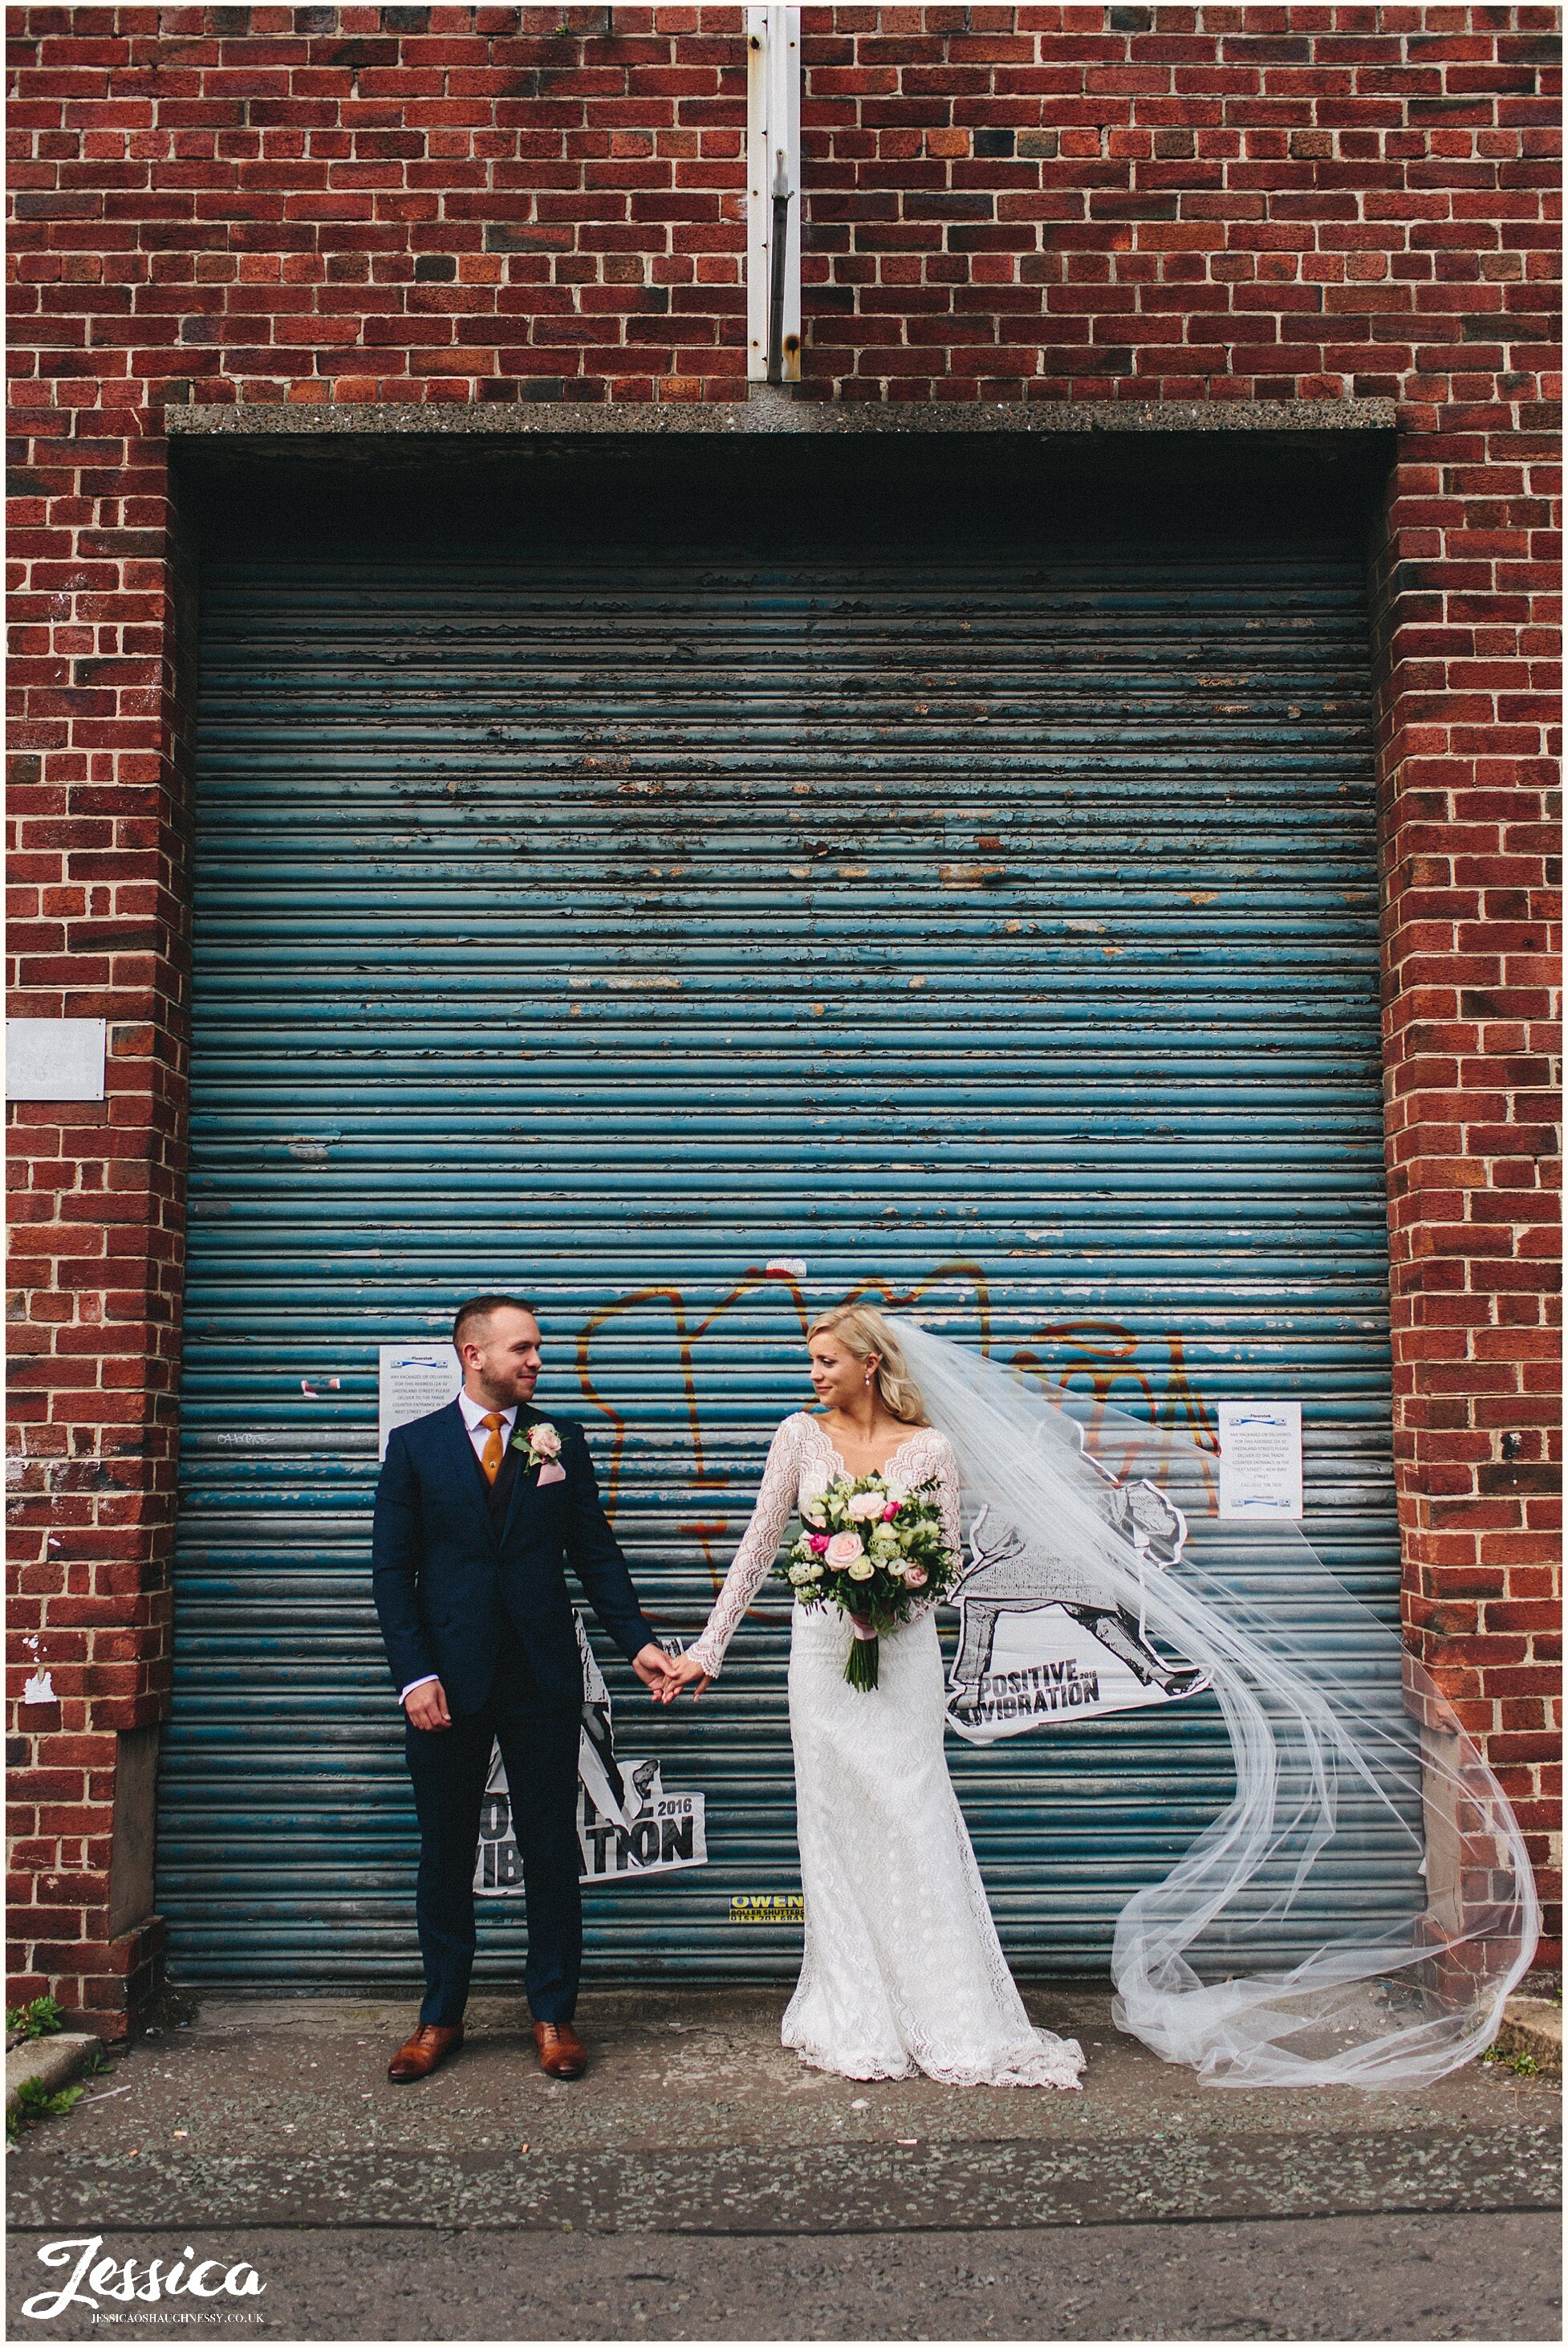 brides veil blows in the wind during urban liverpool photo shoot